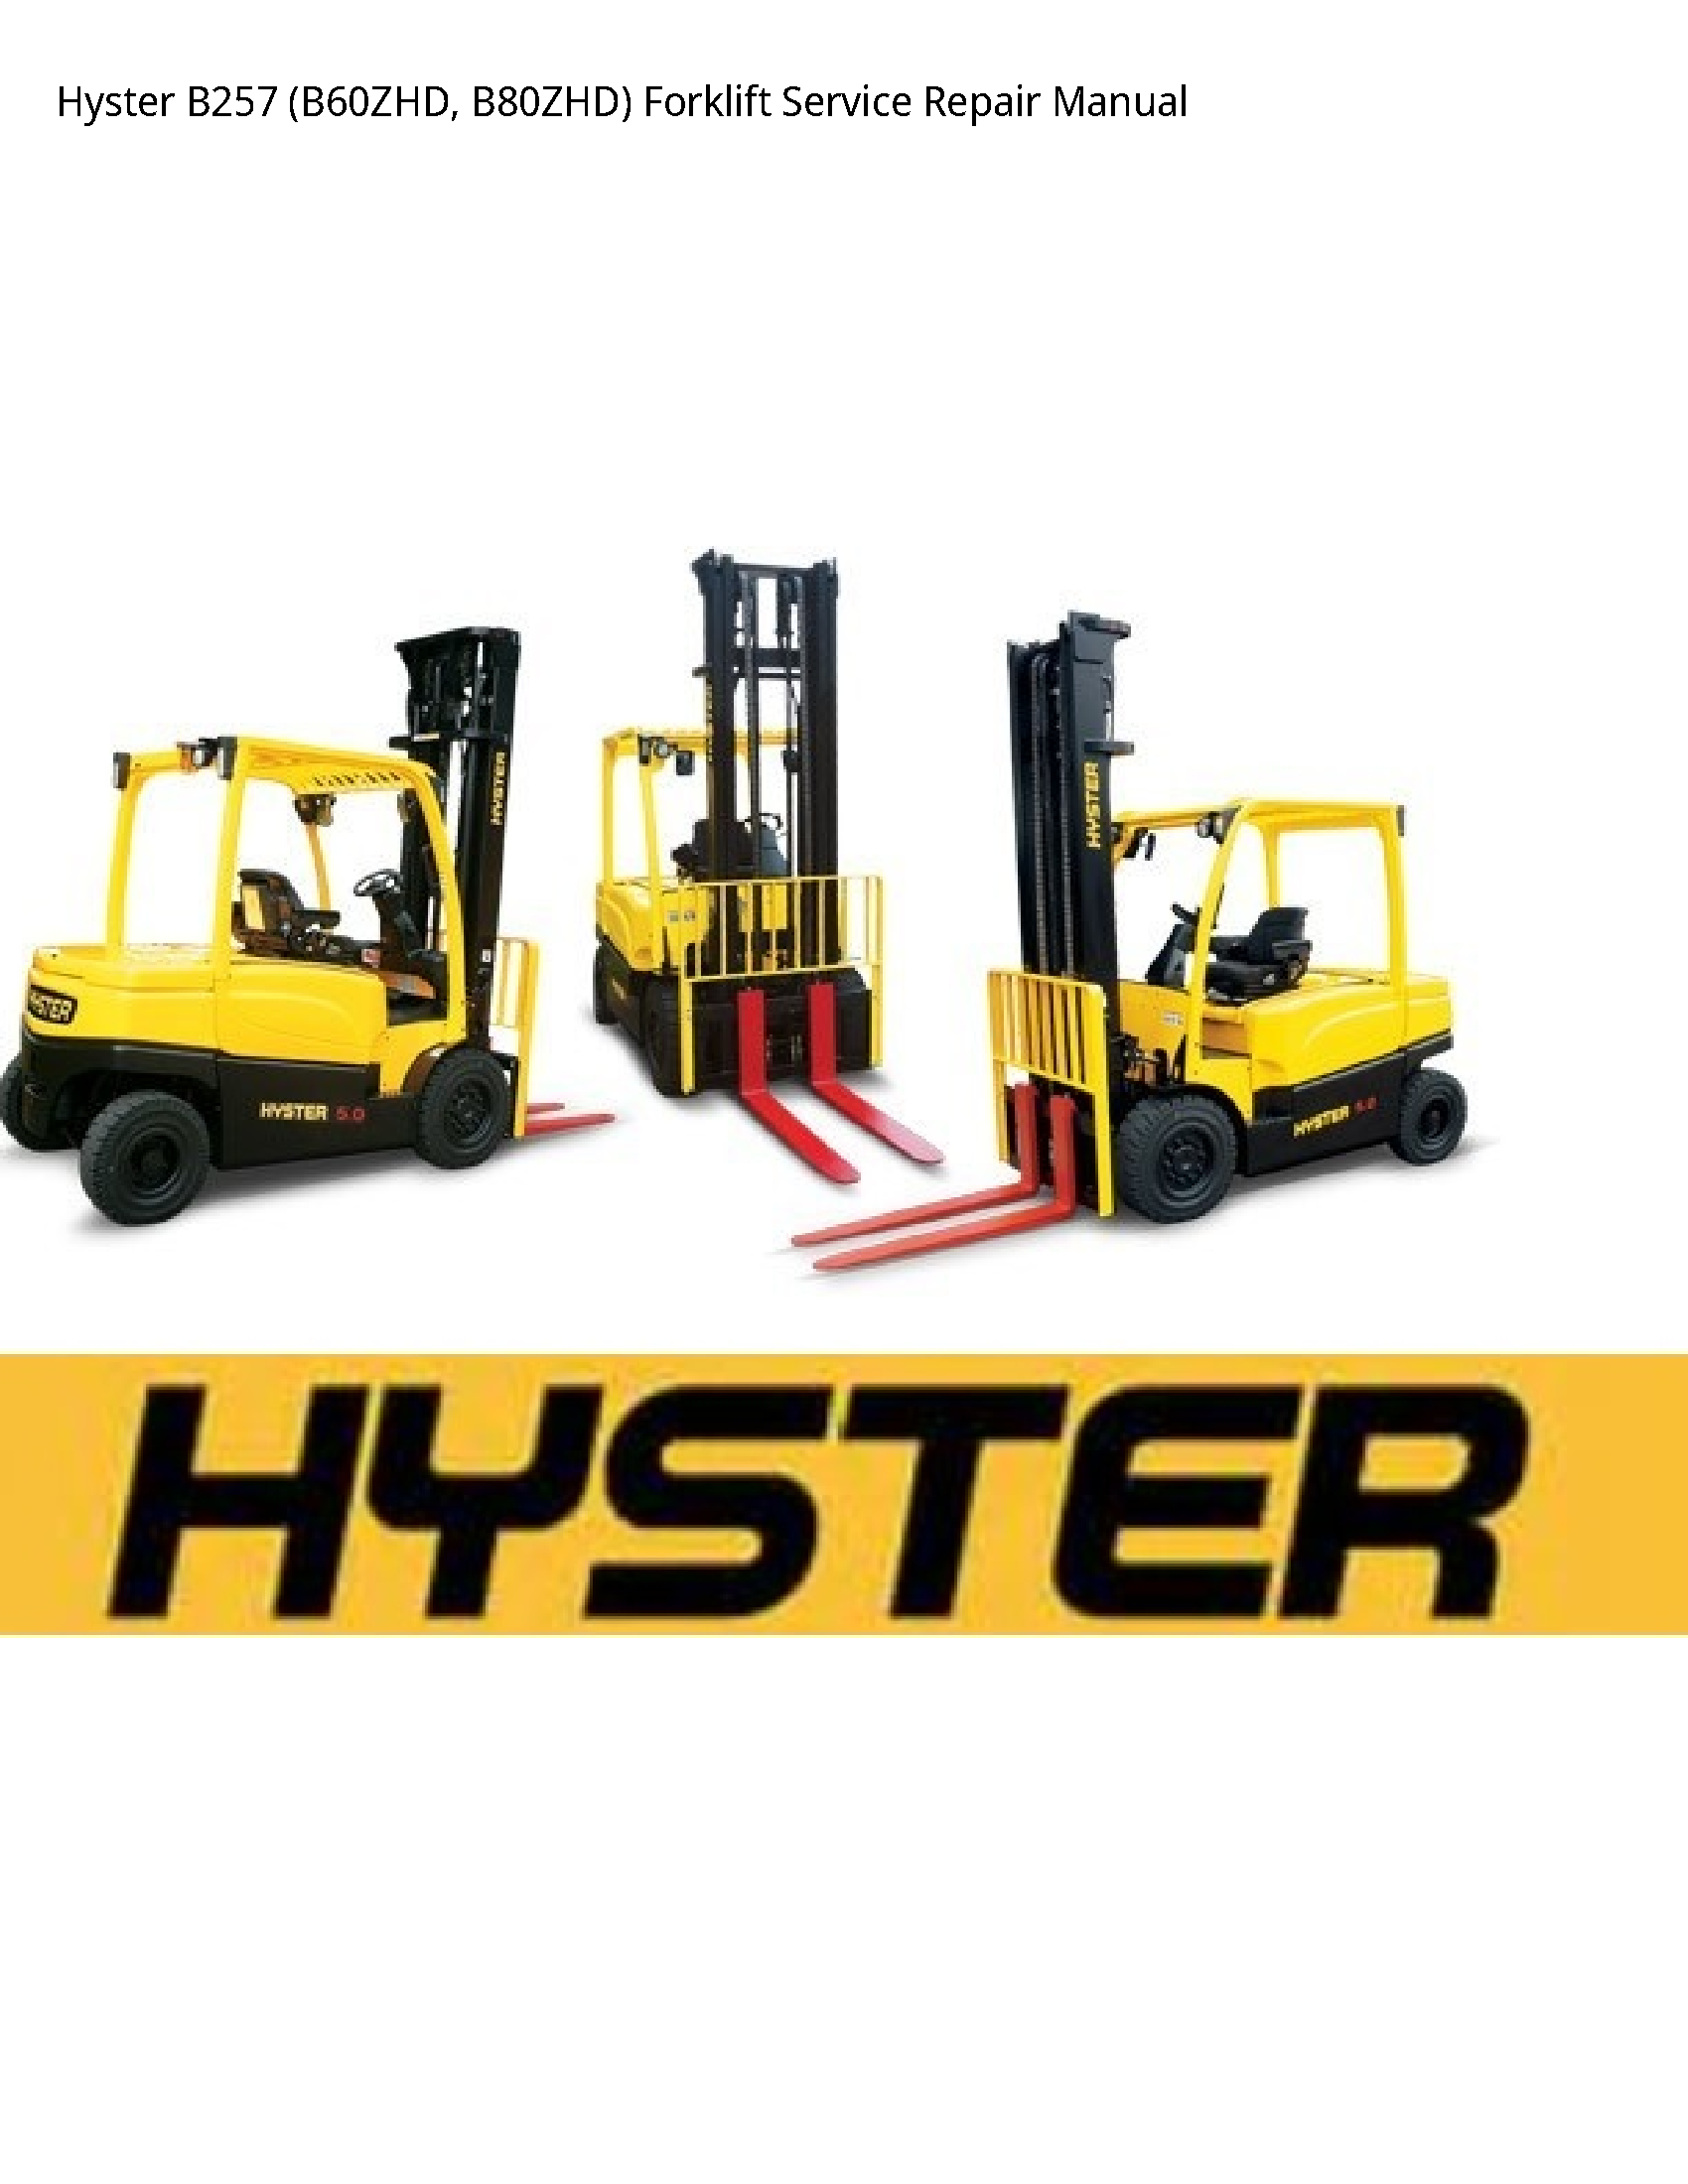 Hyster B257 Forklift manual